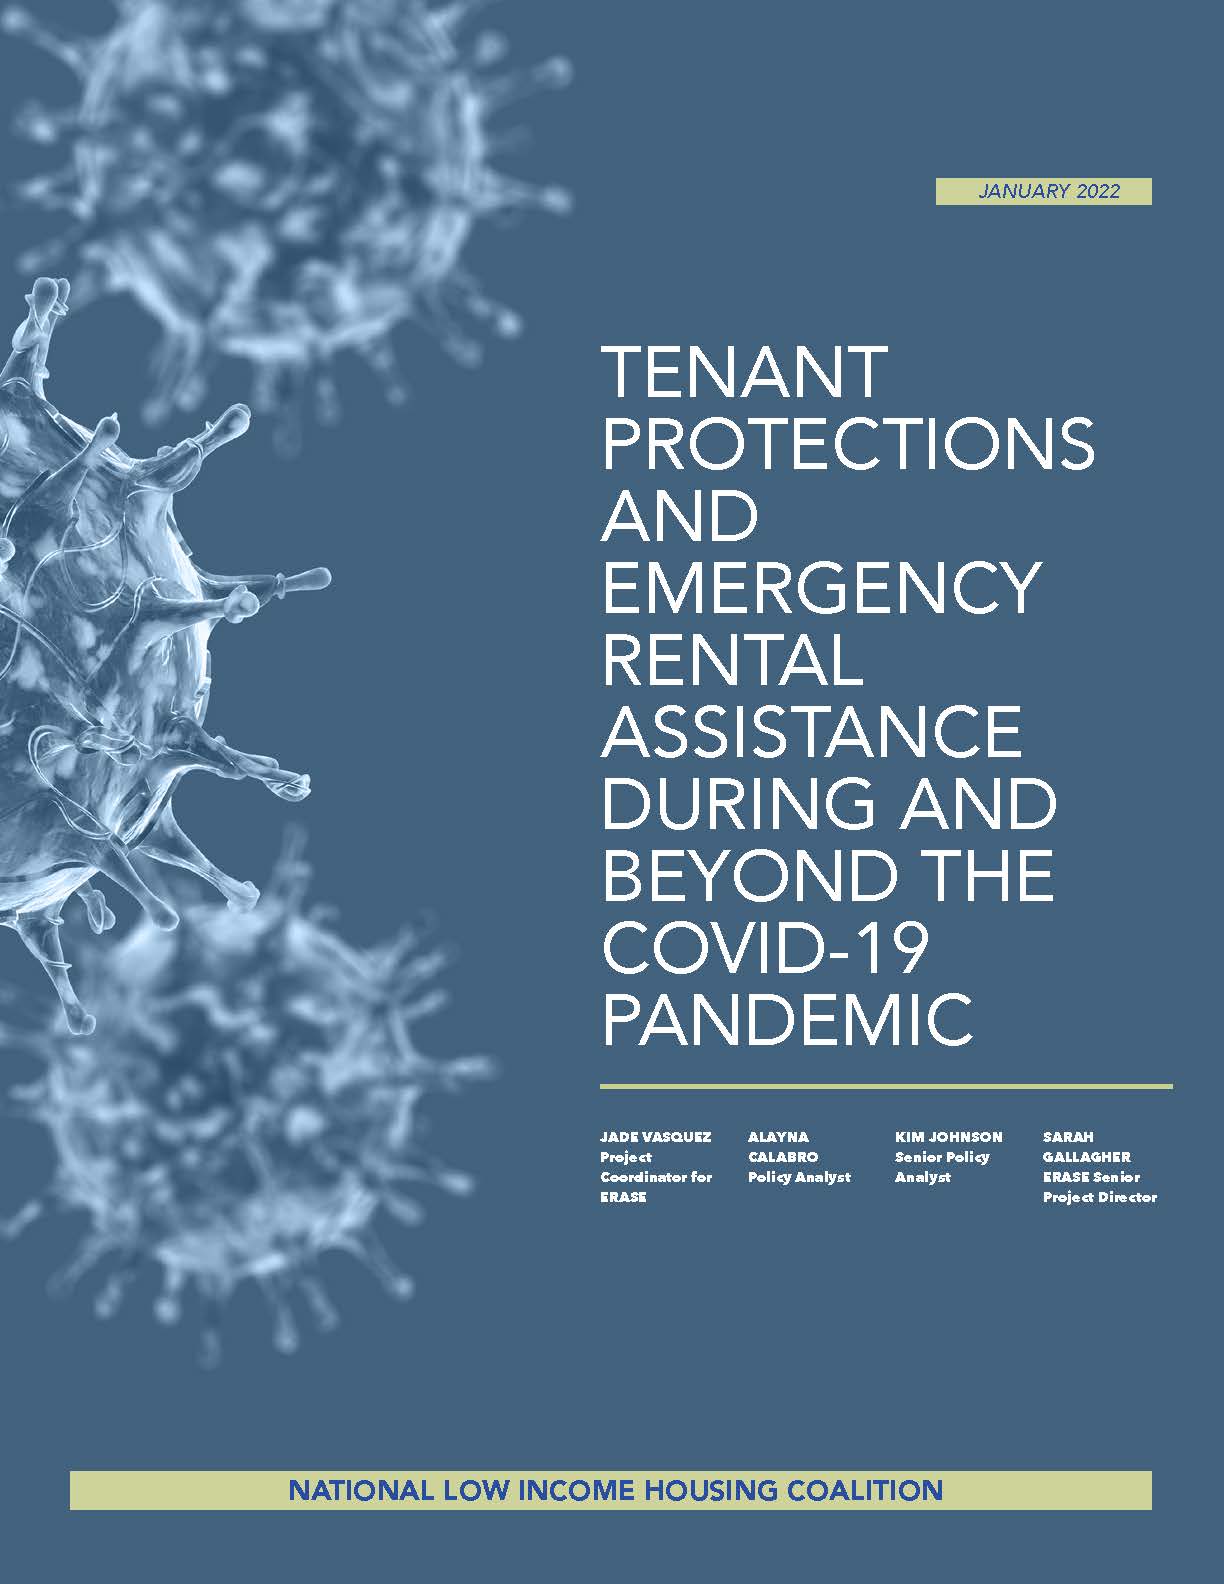 Tenant Protections report